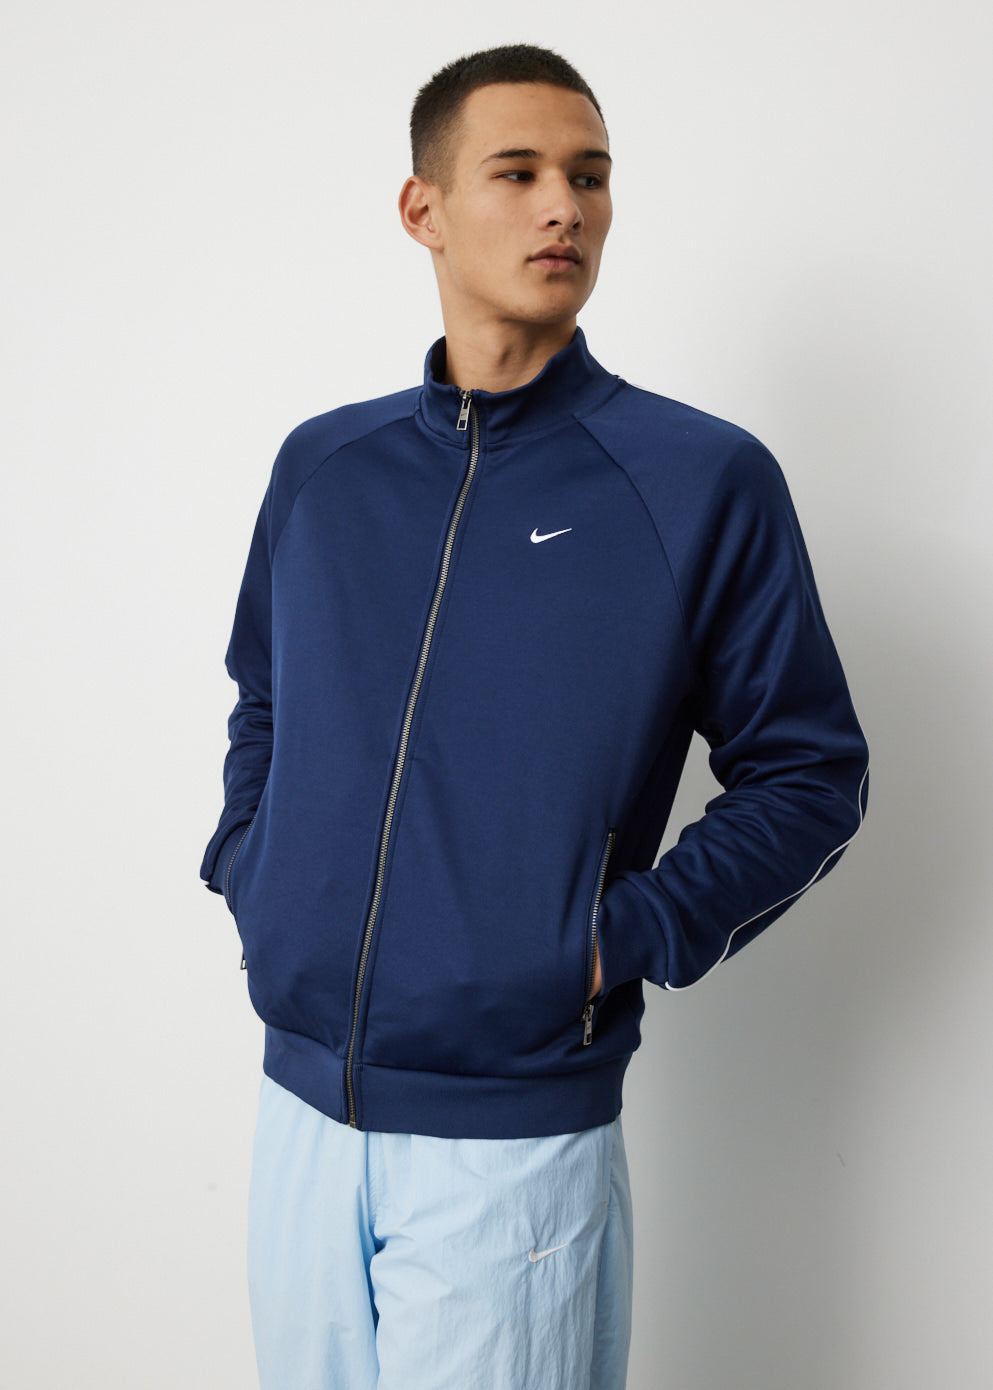 Men's Midnight navy Authentics Track Jacket by Nike | Incu